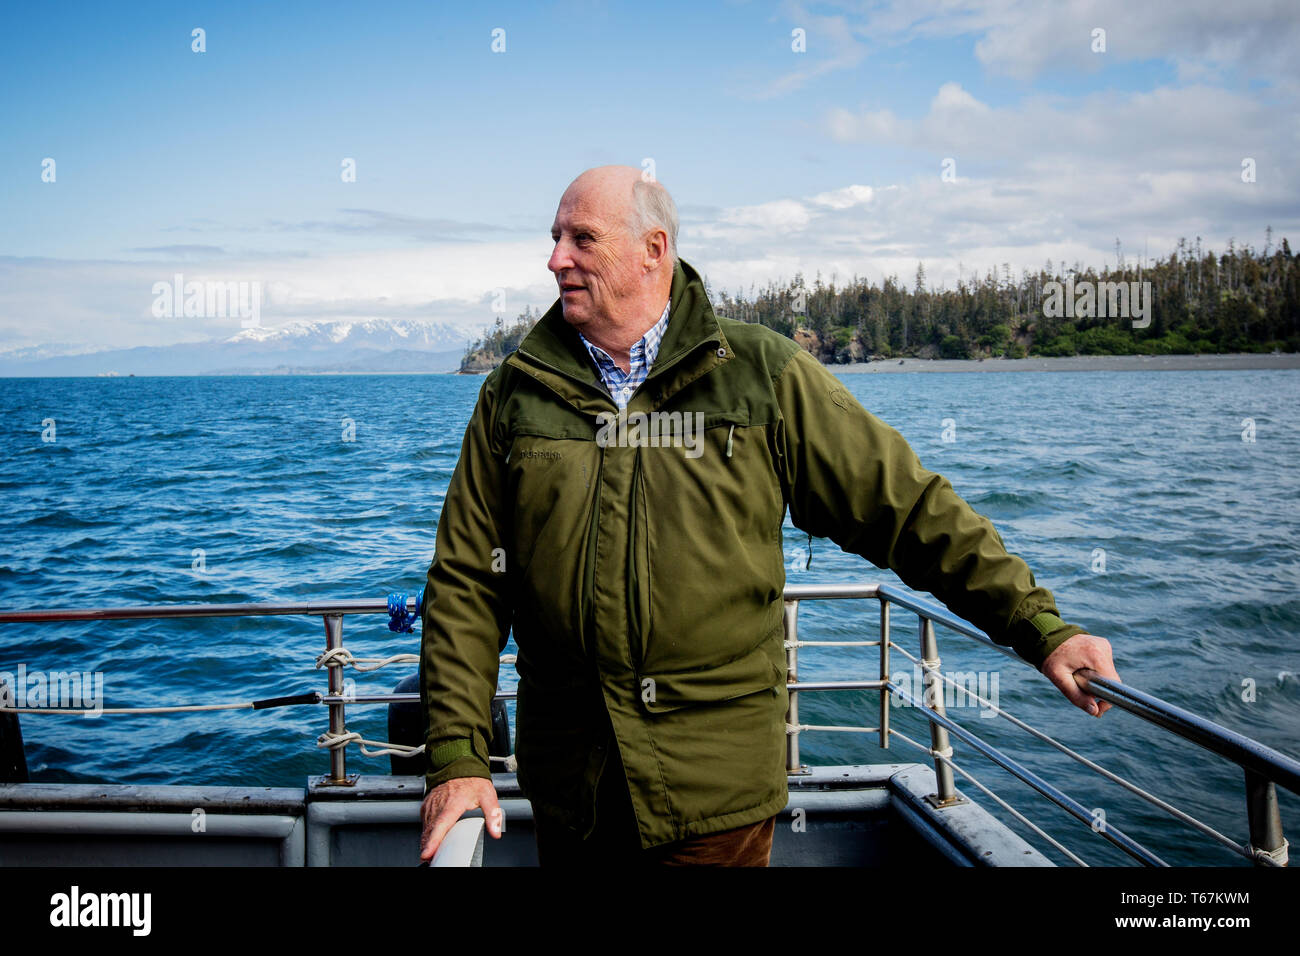 King Harald V of Norway on a trip to Kachemak Bay to see the impact of climate change in the area. An active hunter and fisherman, the king has long had and interest in environmental issues, and has repeatedly urged action to combat man made climate change. Stock Photo